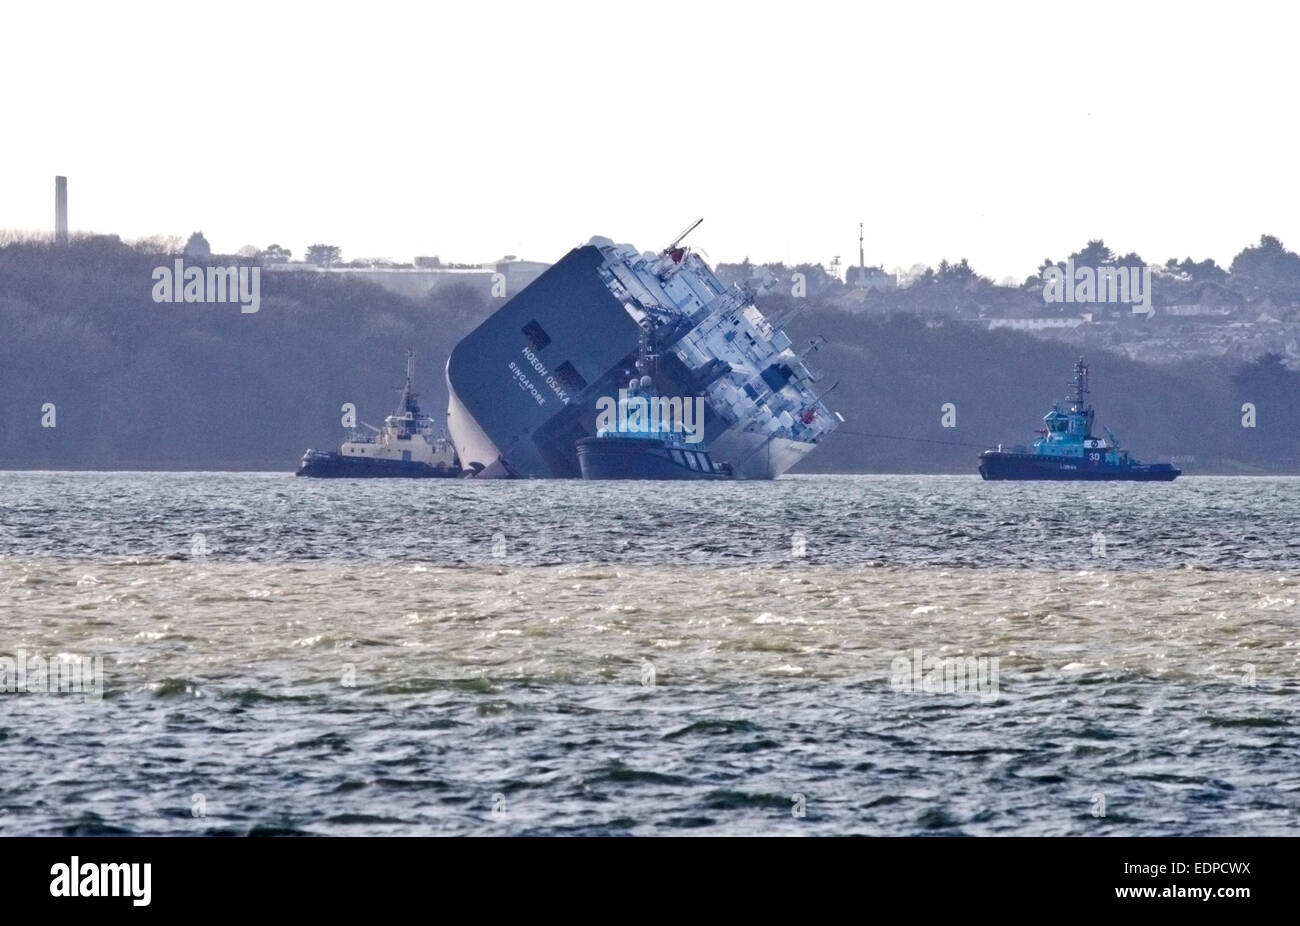 Solent, UK. 12:58pm on 8 January 2015 Hoegh Osaka Car Transporter off Cowes, having been towed 2 miles from Bramble Bank in the Solent where she ran aground on 3 January 2015, has now begun to be turned by tug boats to prevent disruption to the shipping lane.  The tug boat on the right is using a rope to turn the vessel while the other tugs appear to be nudging it. Credit:  Krys Bailey/Alamy Live News Stock Photo